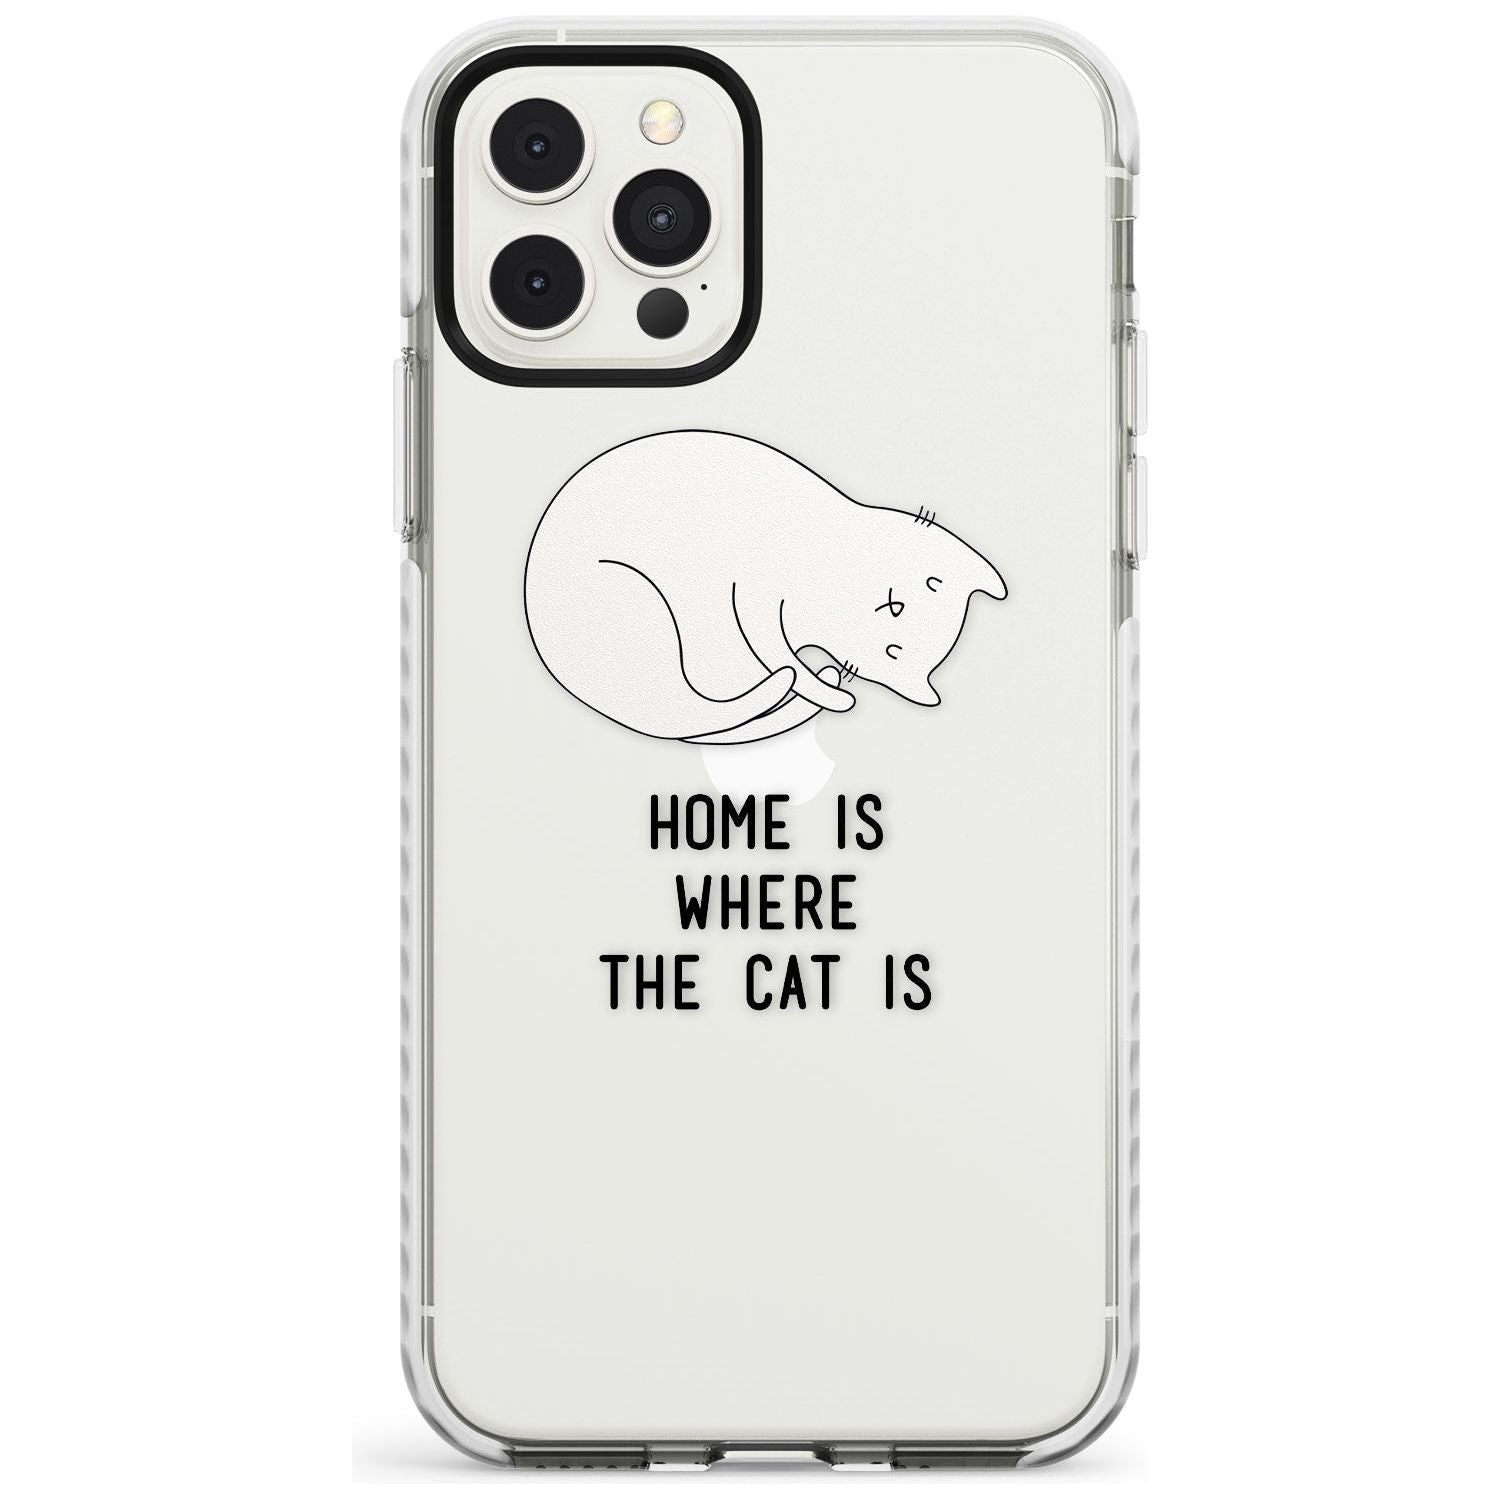 Home Is Where the Cat is Slim TPU Phone Case for iPhone 11 Pro Max